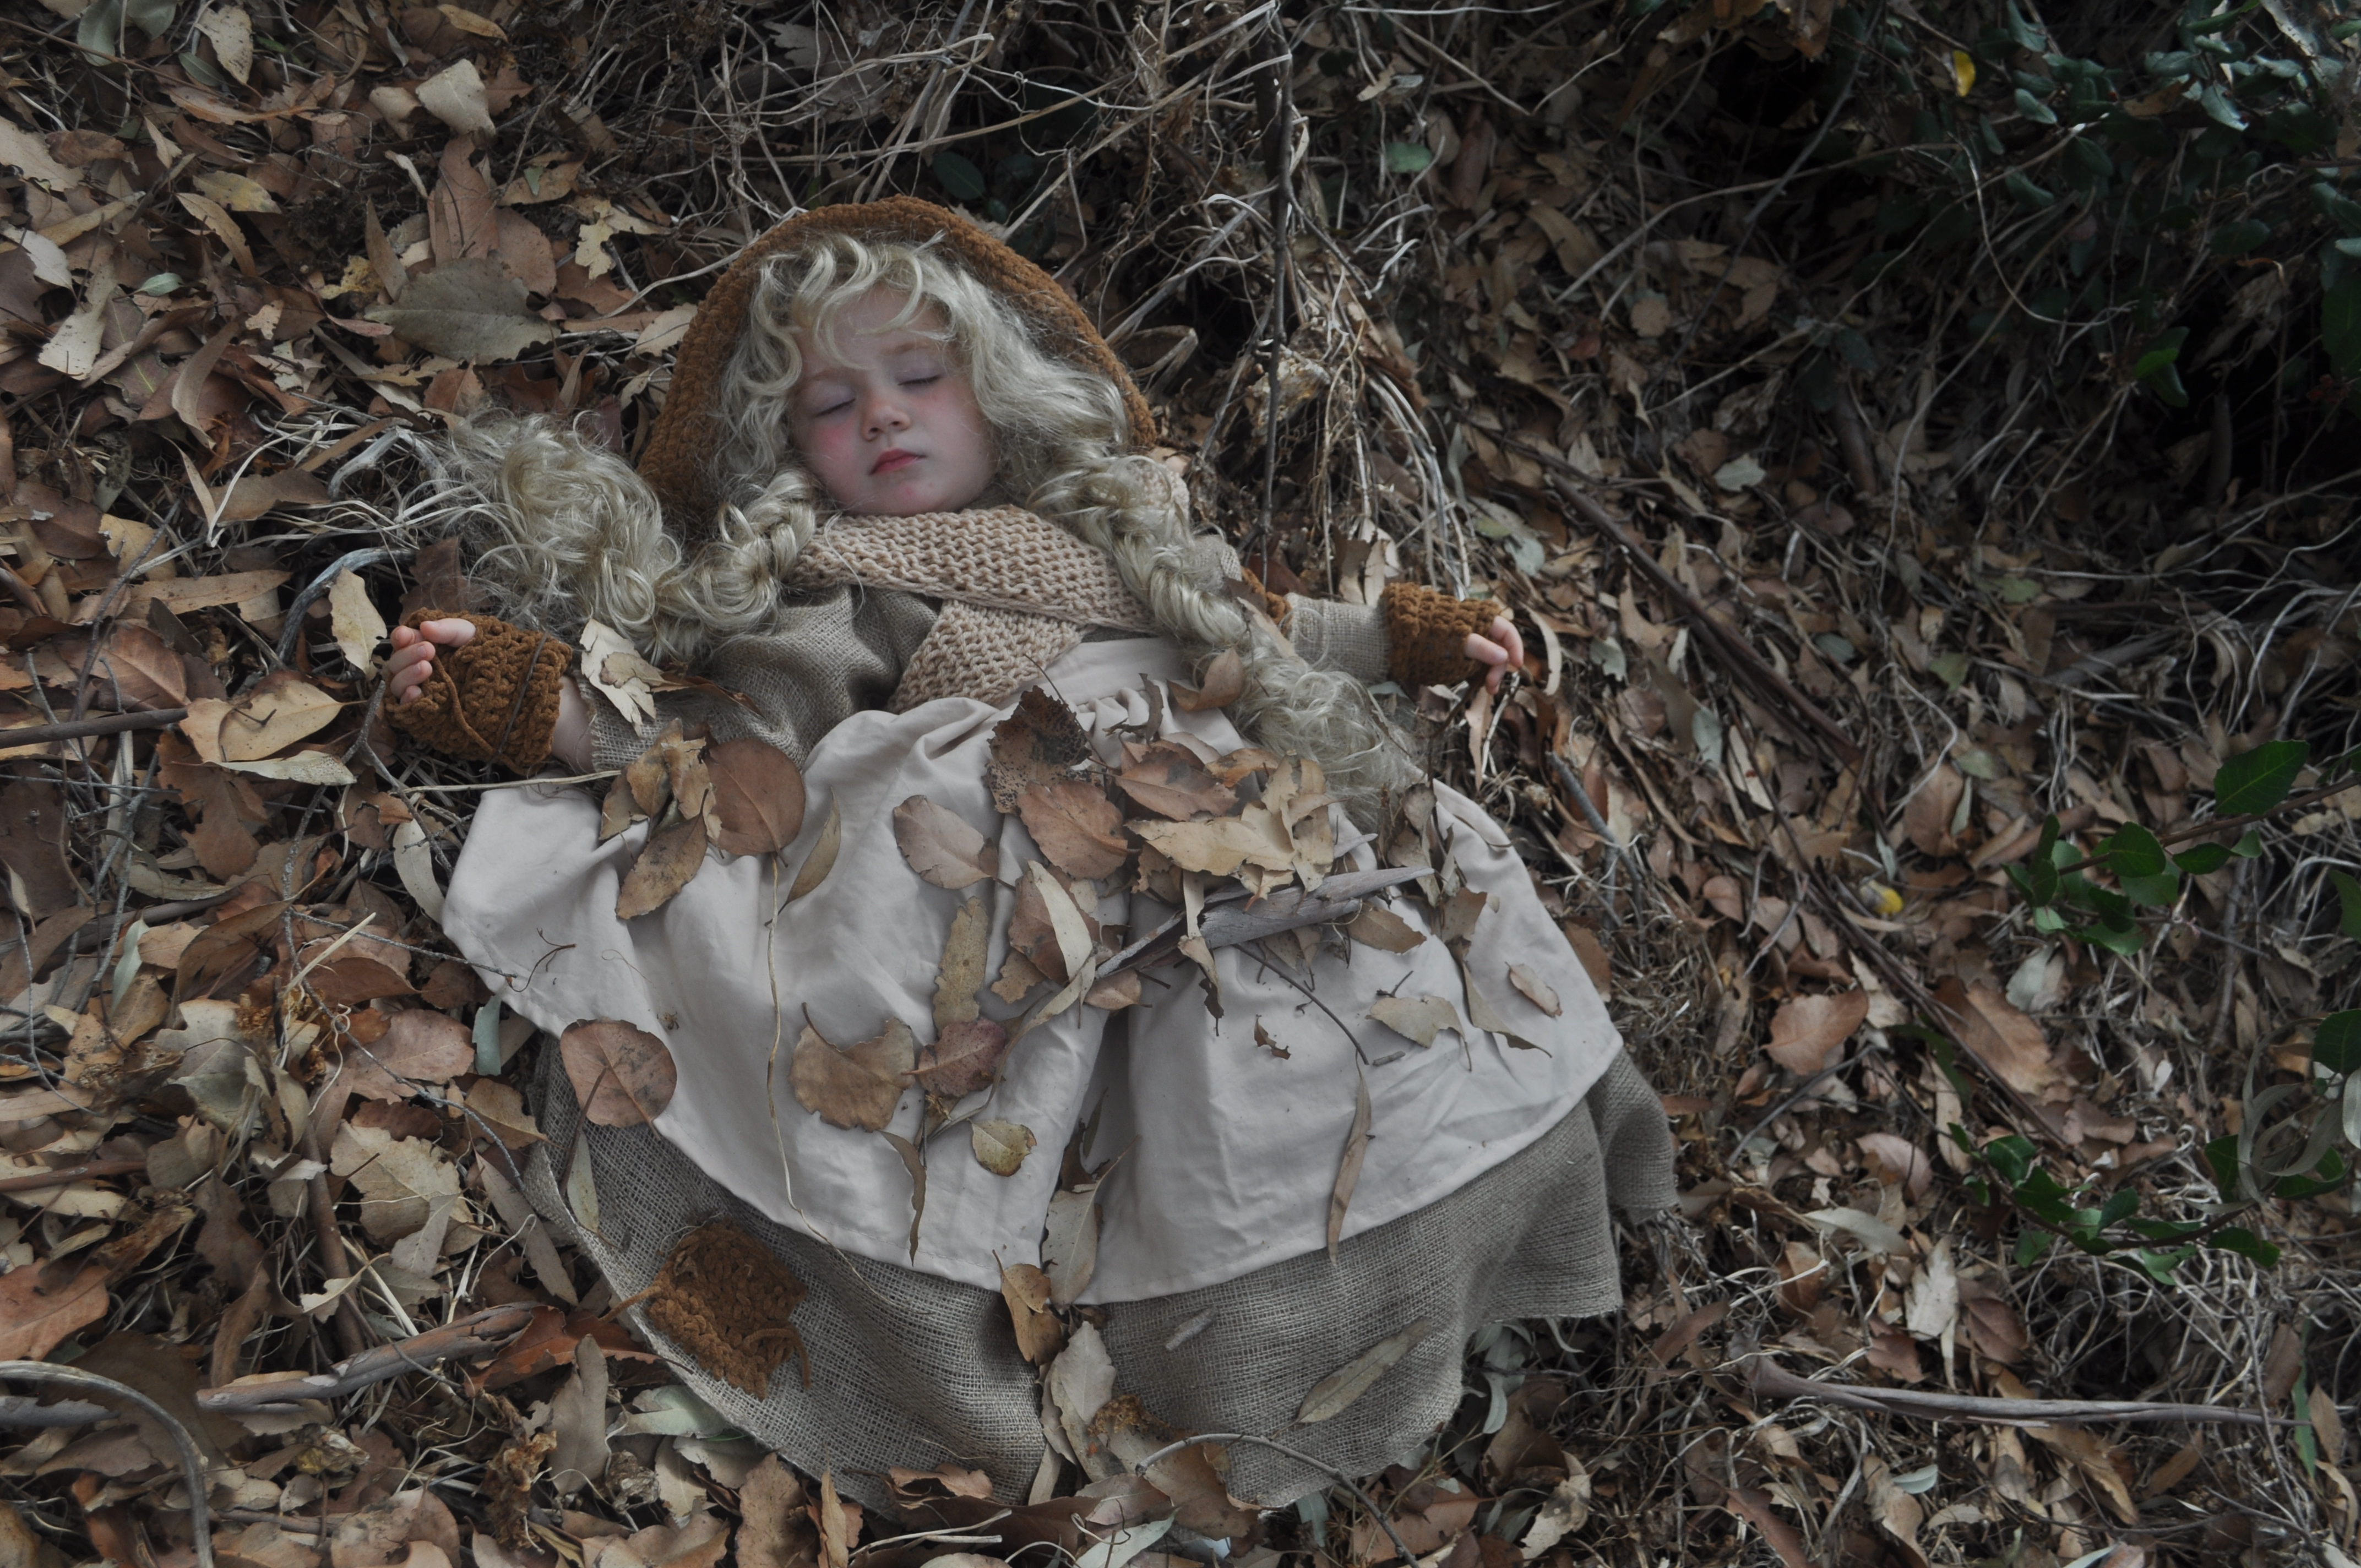 Cinderella. 2nd day in the woods went by and tired Cinderella went to sleep with a wish to find the way out of the woods on the 3rd day. Costume custom-designed and custom-made by Oxana Foss